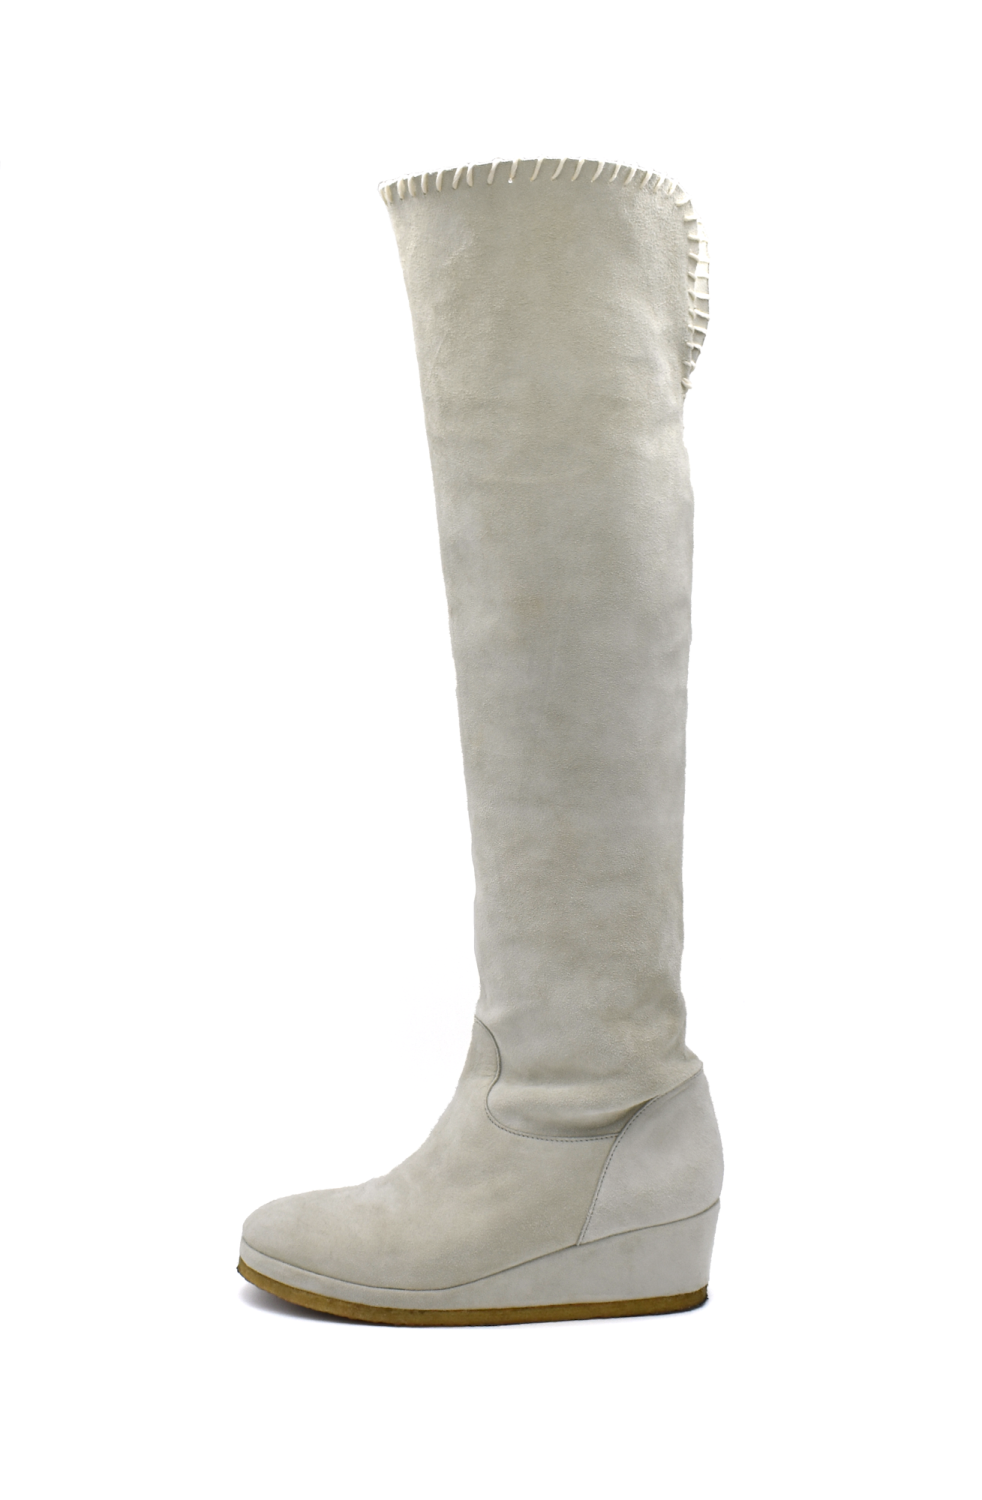 Wedge Over The Knee Boots